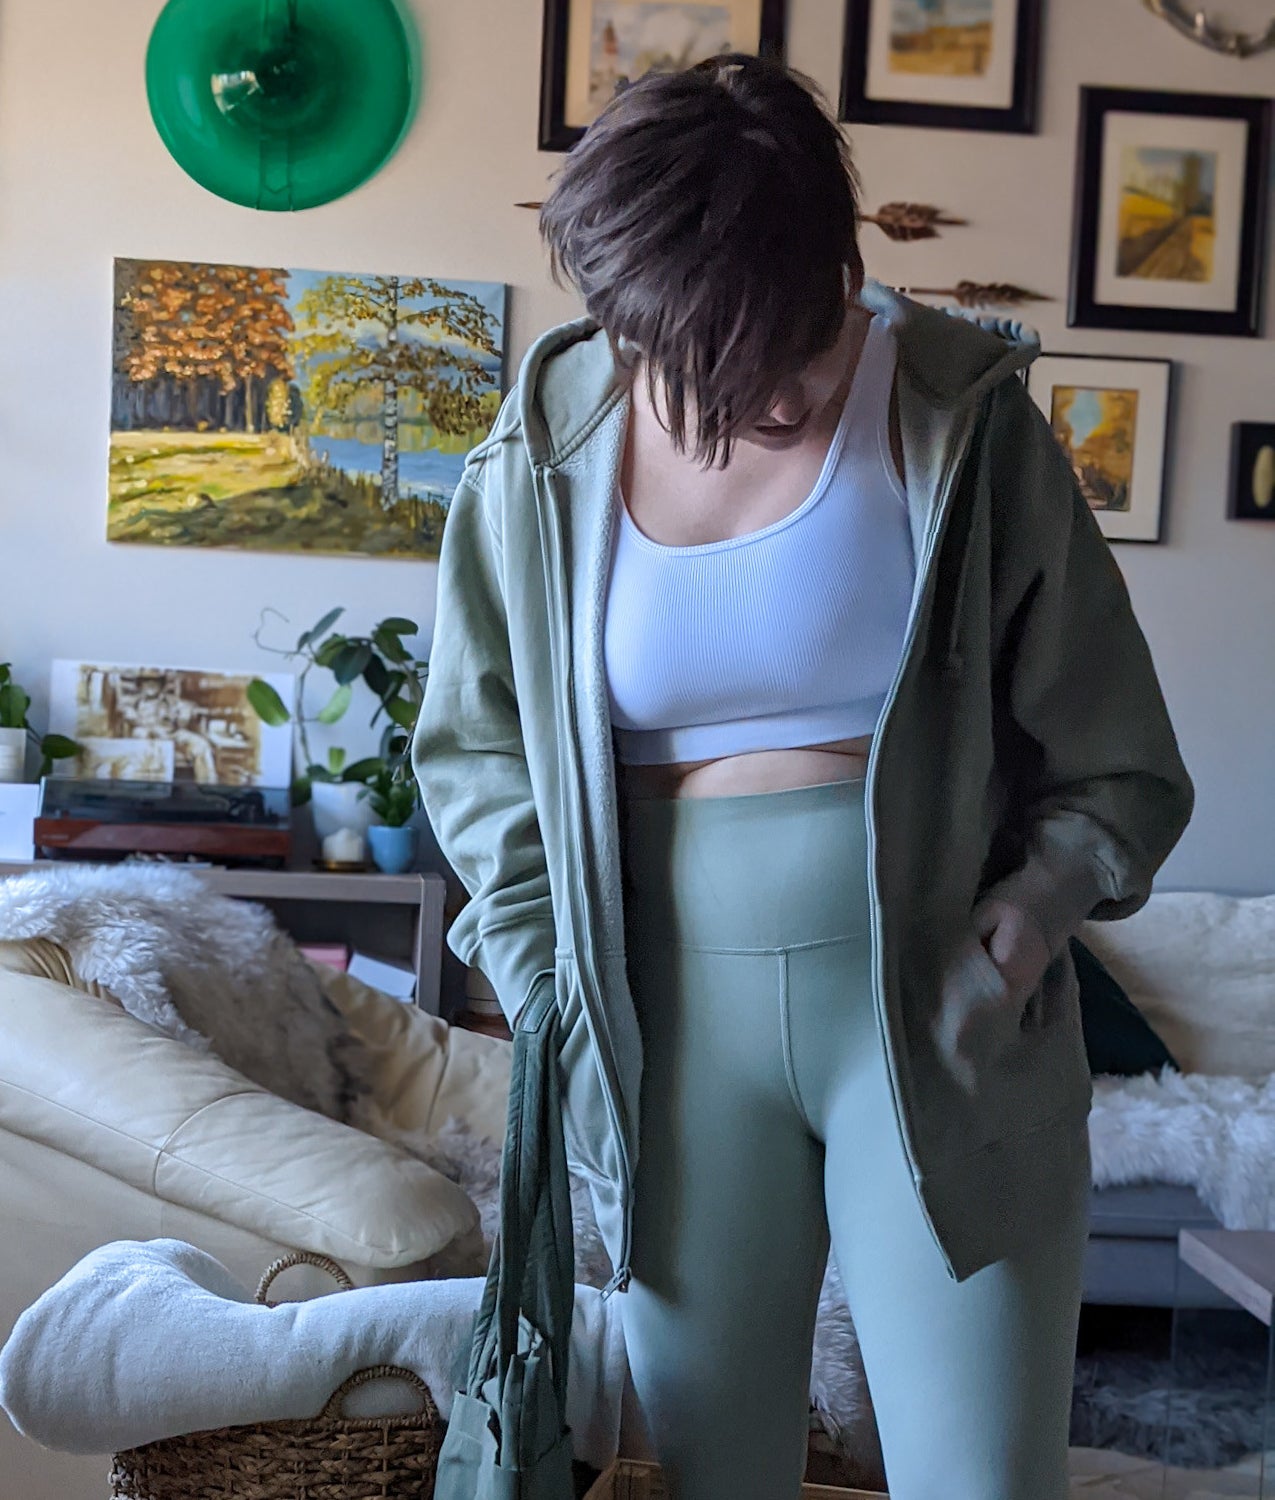 Victoria wearing the oversized hoodie with a matching pair of leggings